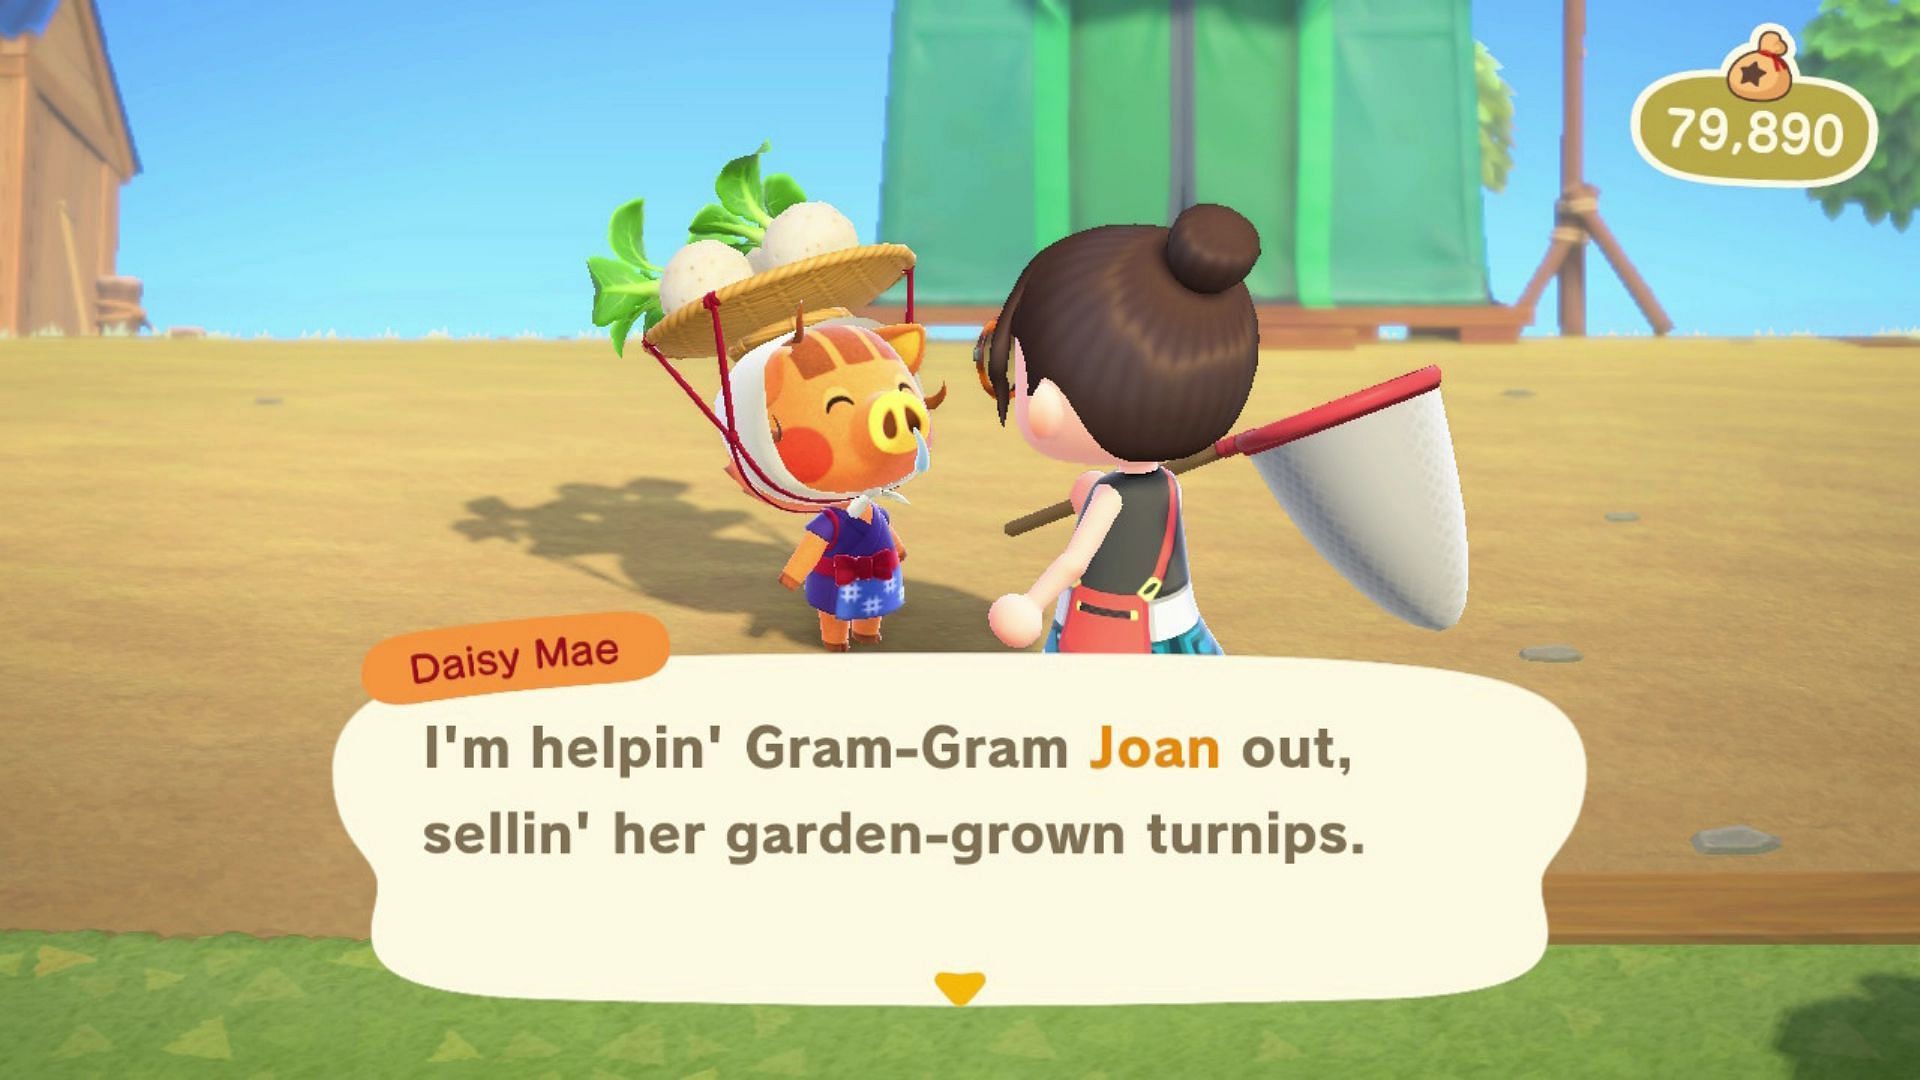 Daisy Mae has taken over from her grandma to sell the turnips (Image via Nintendo)